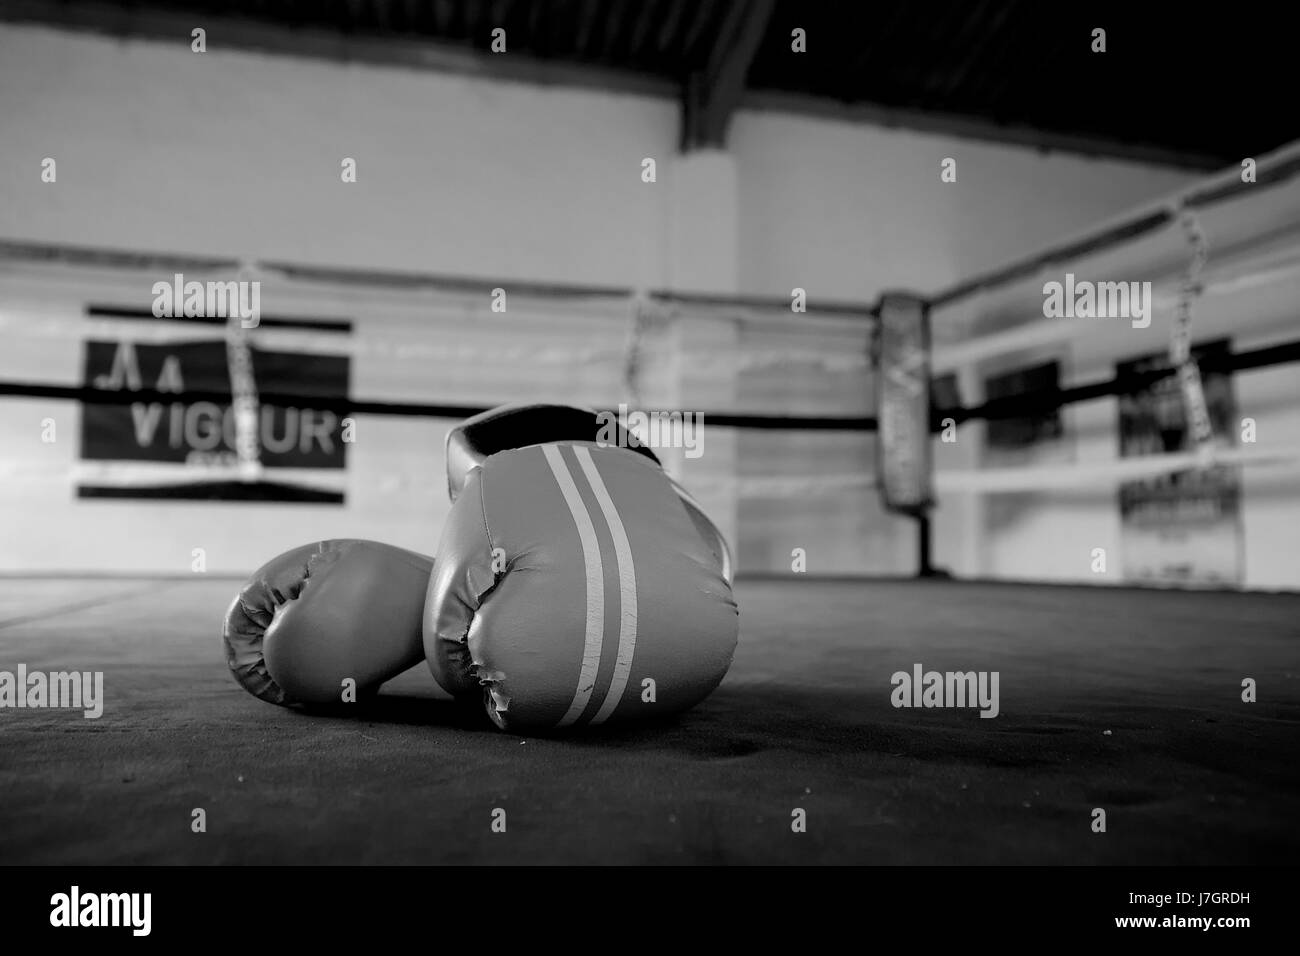 Boxing gloves on the canvas of a boxing ring at a gym Stock Photo